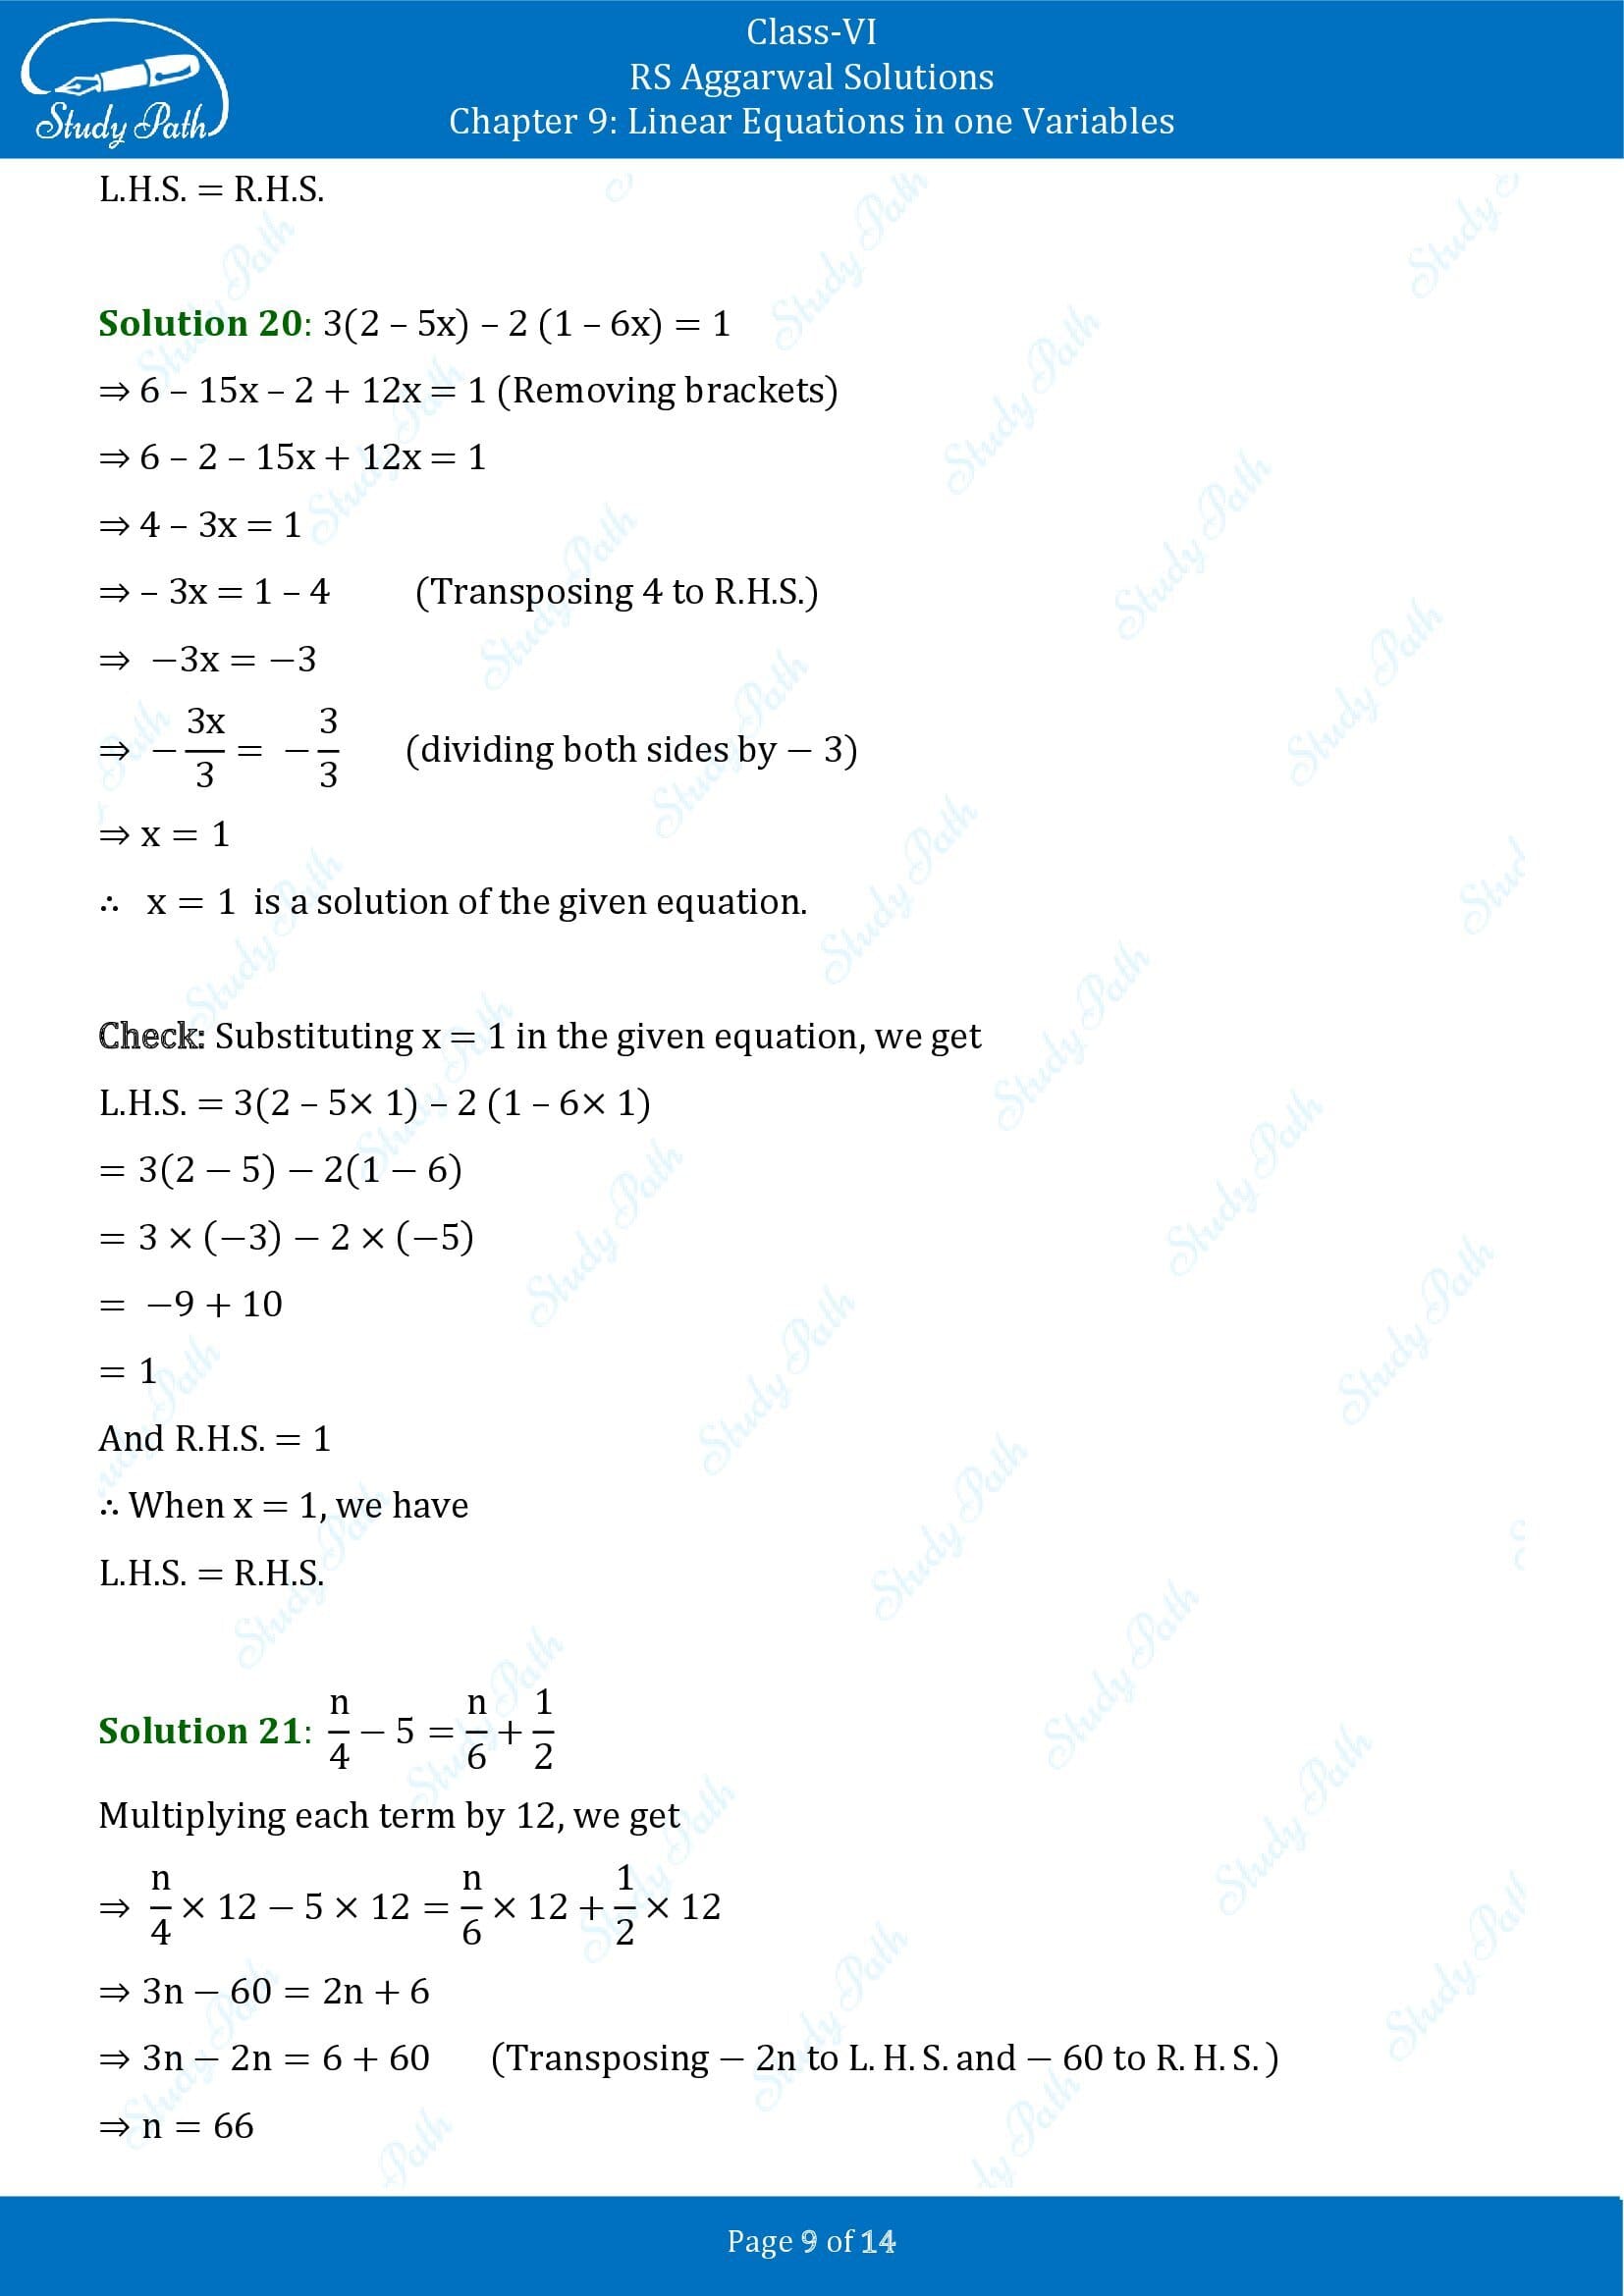 RS Aggarwal Solutions Class 6 Chapter 9 Linear Equations in One Variable Exercise 9B 00009